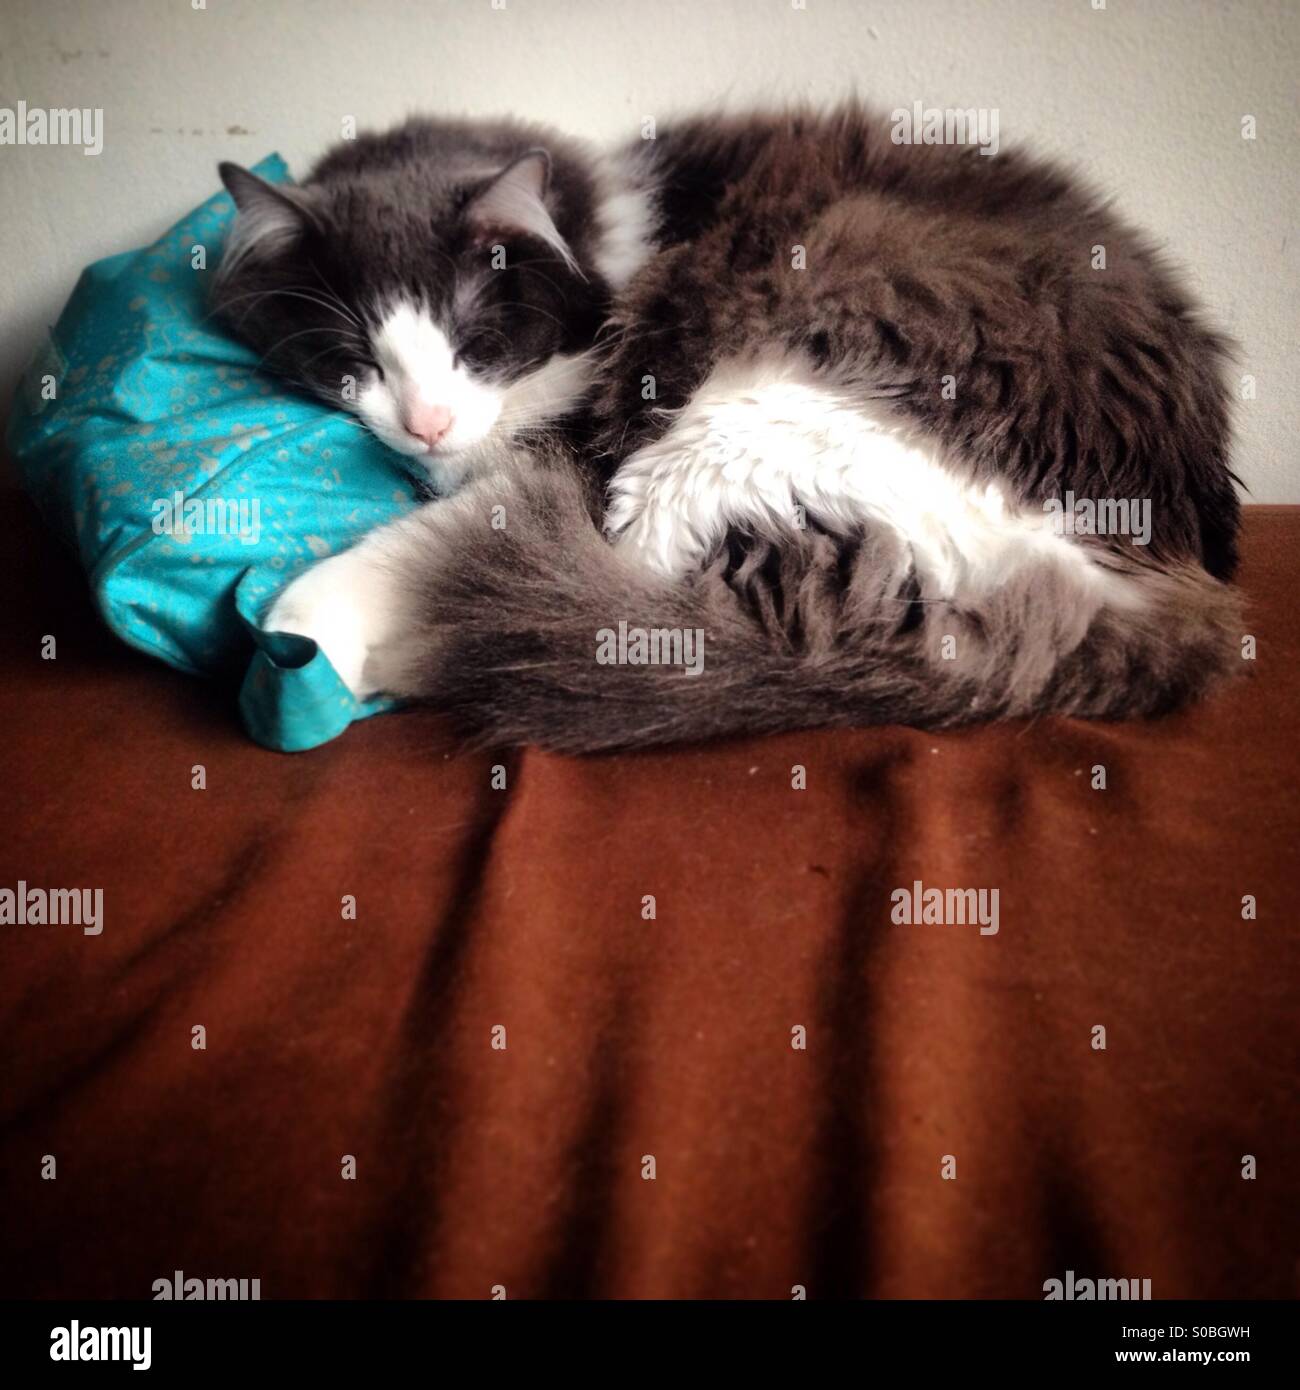 A cat sleeps on a blue bag in Mexico City, Mexico Stock Photo